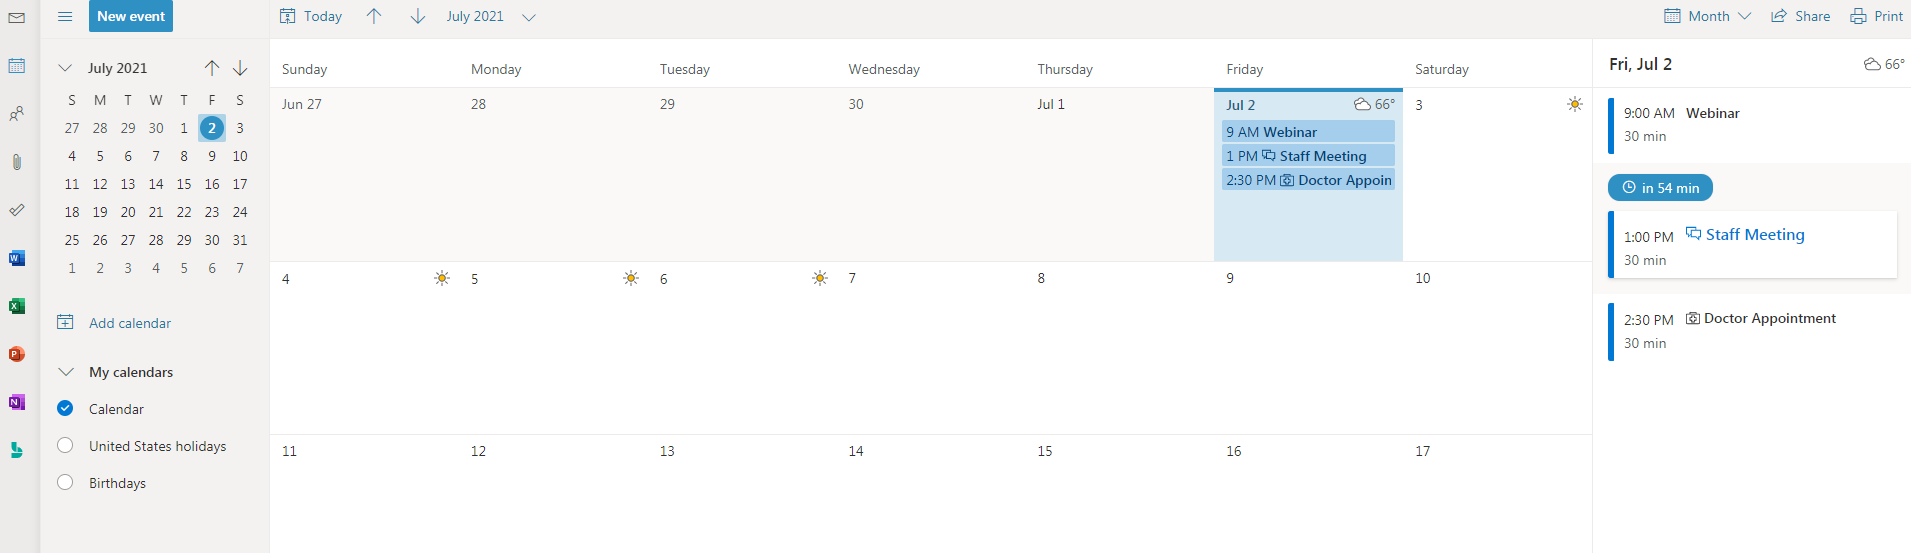 screenshot of the Outlook calendar month view with agenda